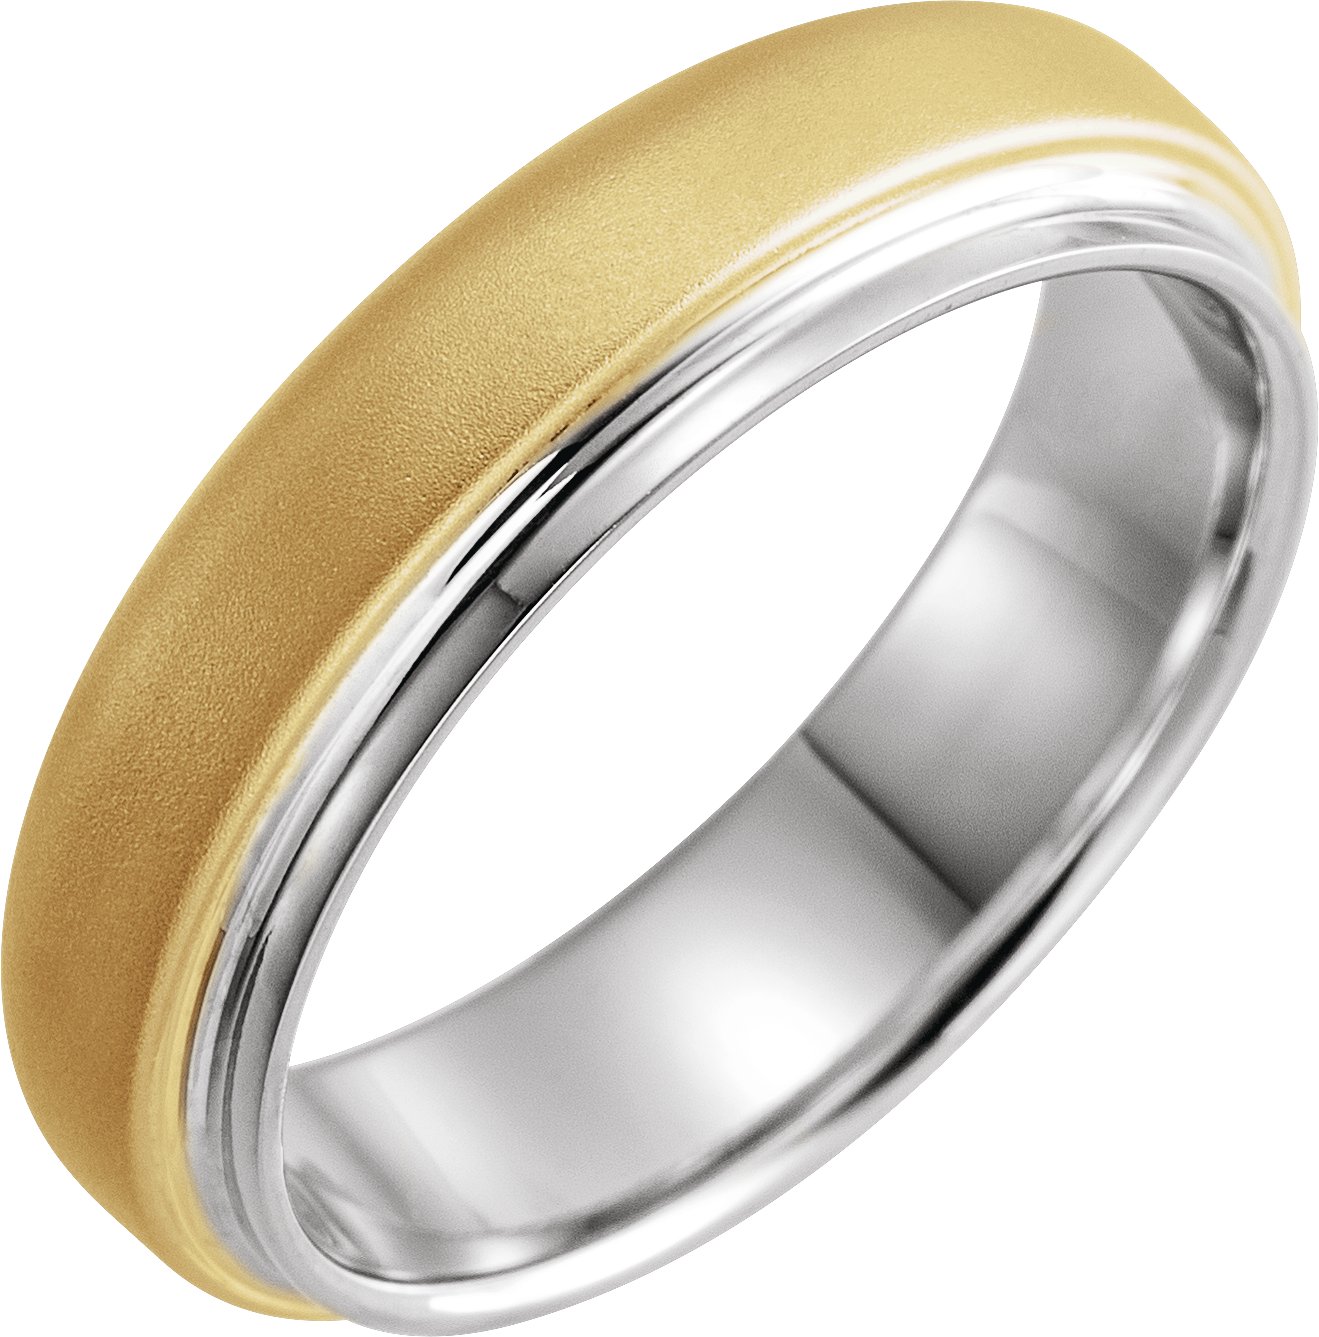 14K White & Yellow 6 mm Edged Band with Brushed Finished Size 9.5